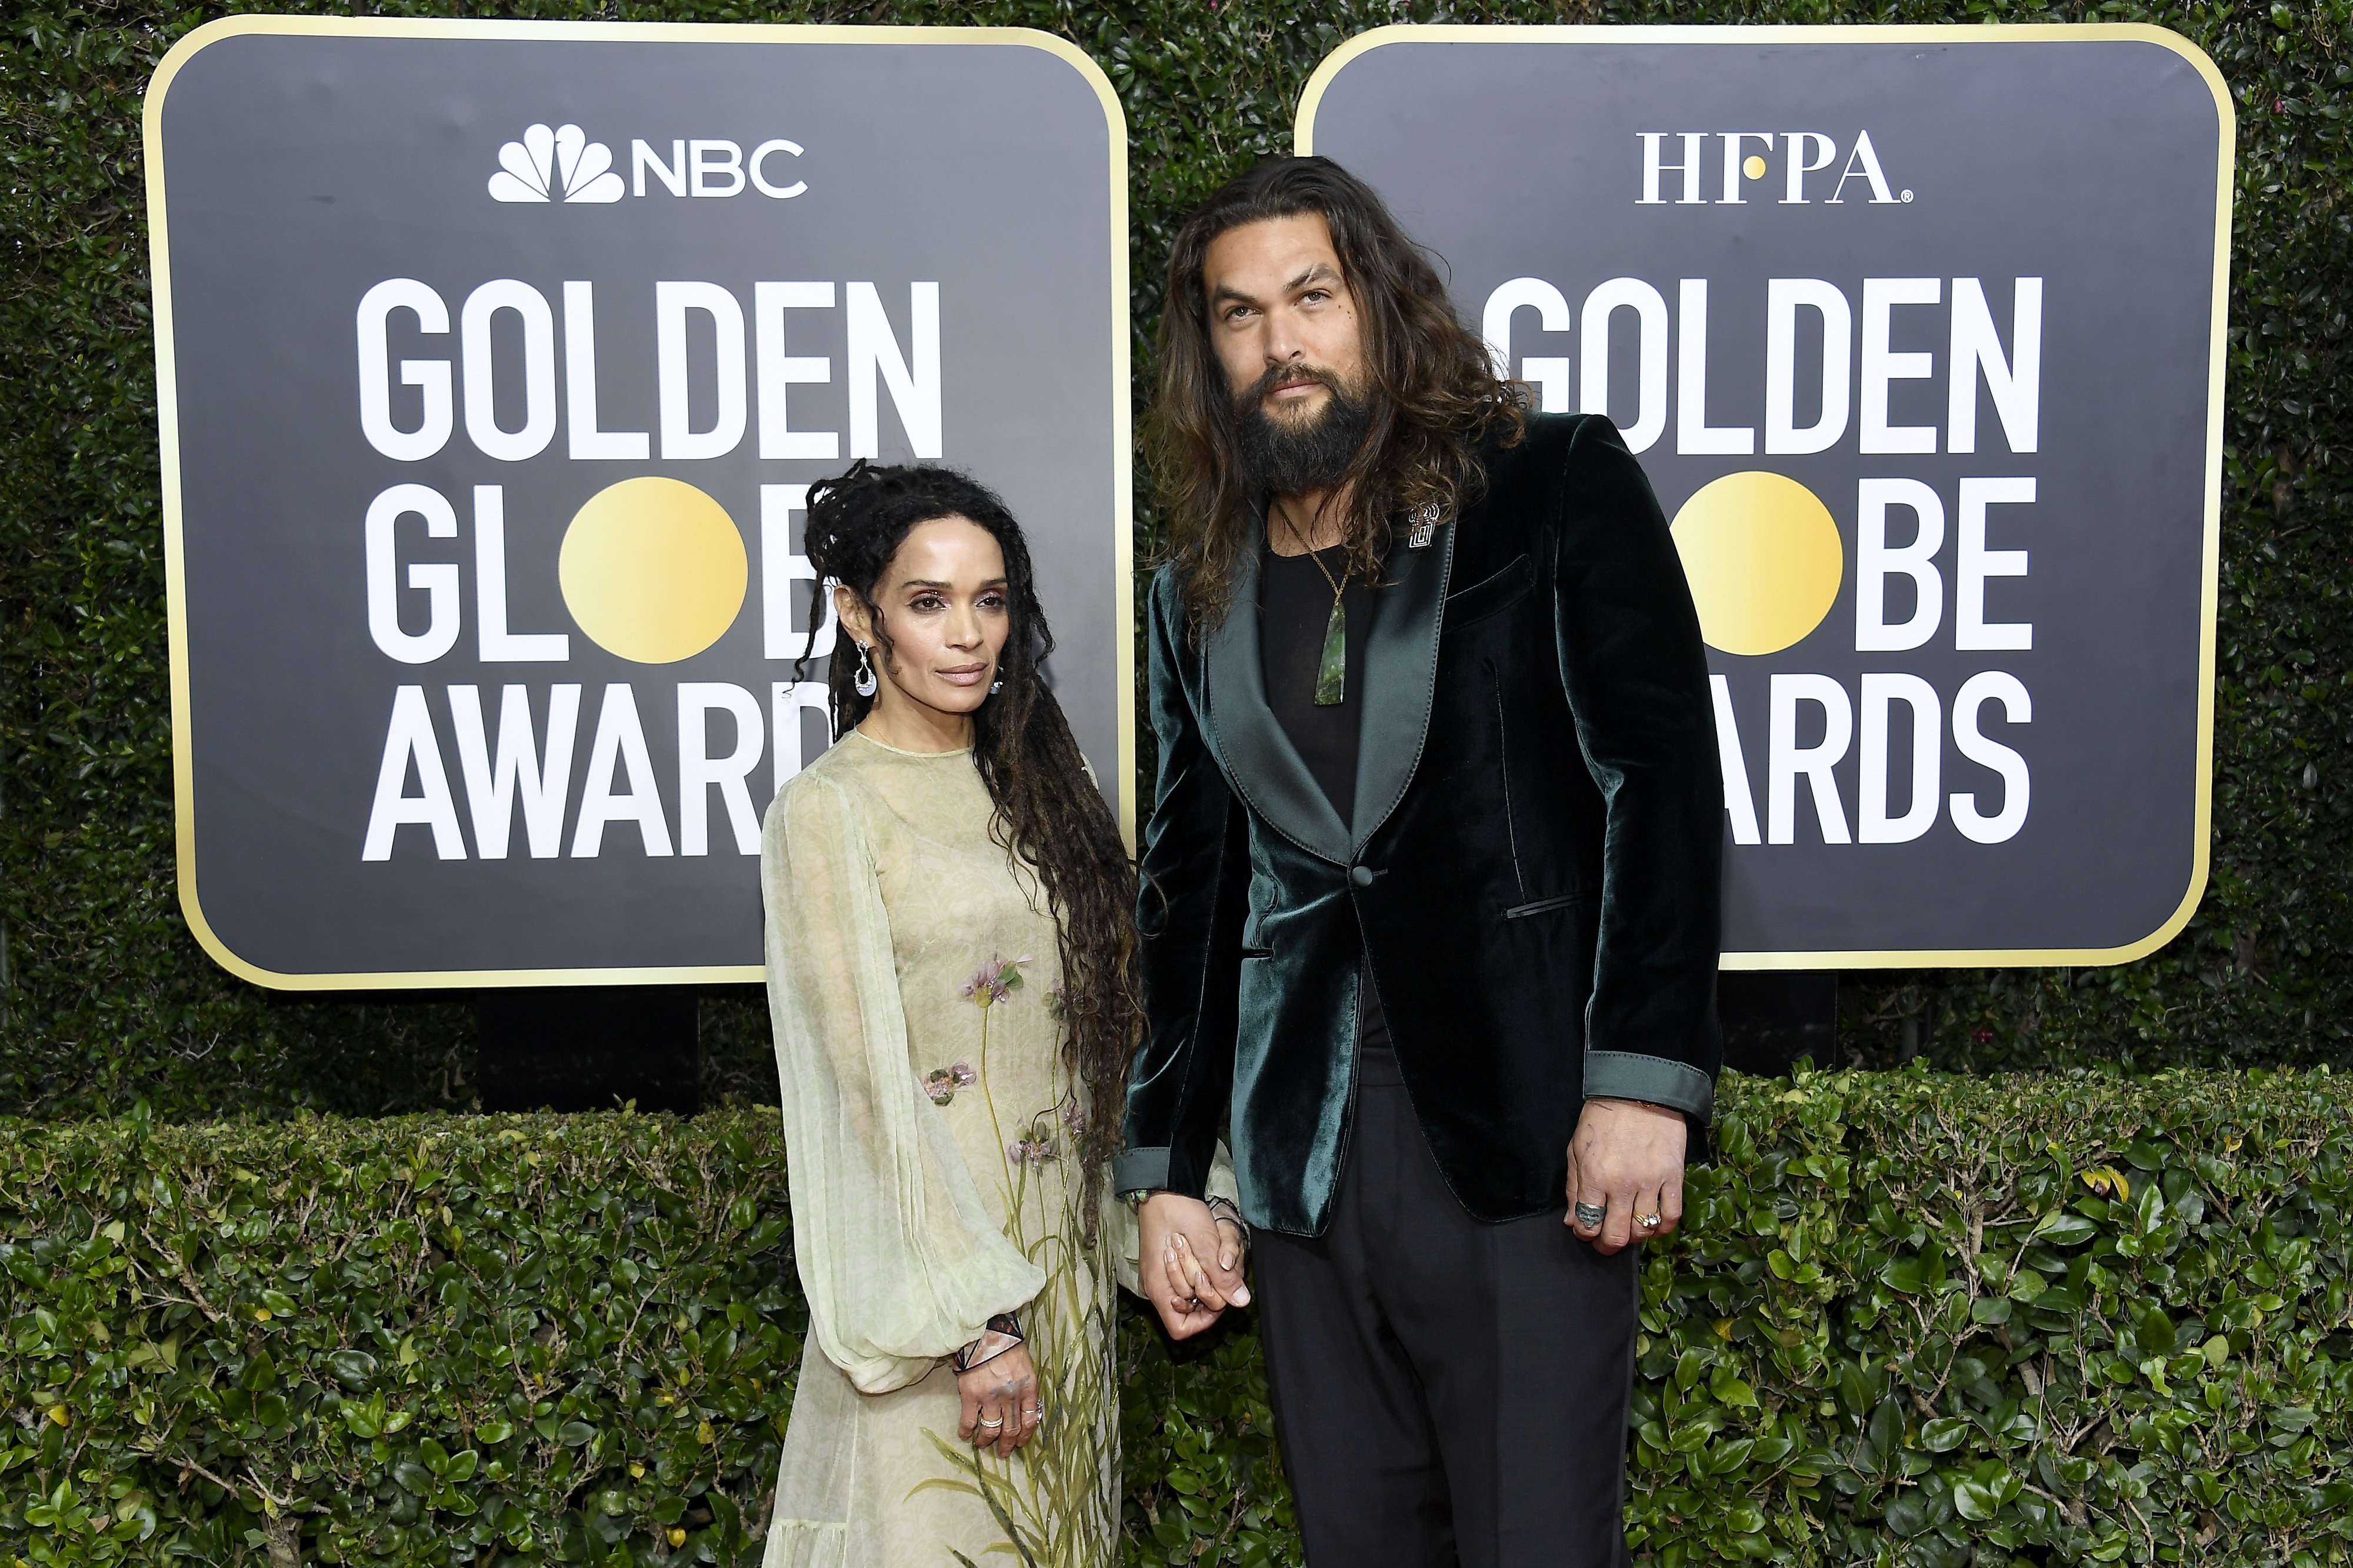 Lisa Bonet and Jason Momoa arrive to the 77th Annual Golden Globe Awards held at the Beverly Hilton Hotel on January 5, 2020 | Source: Getty Images